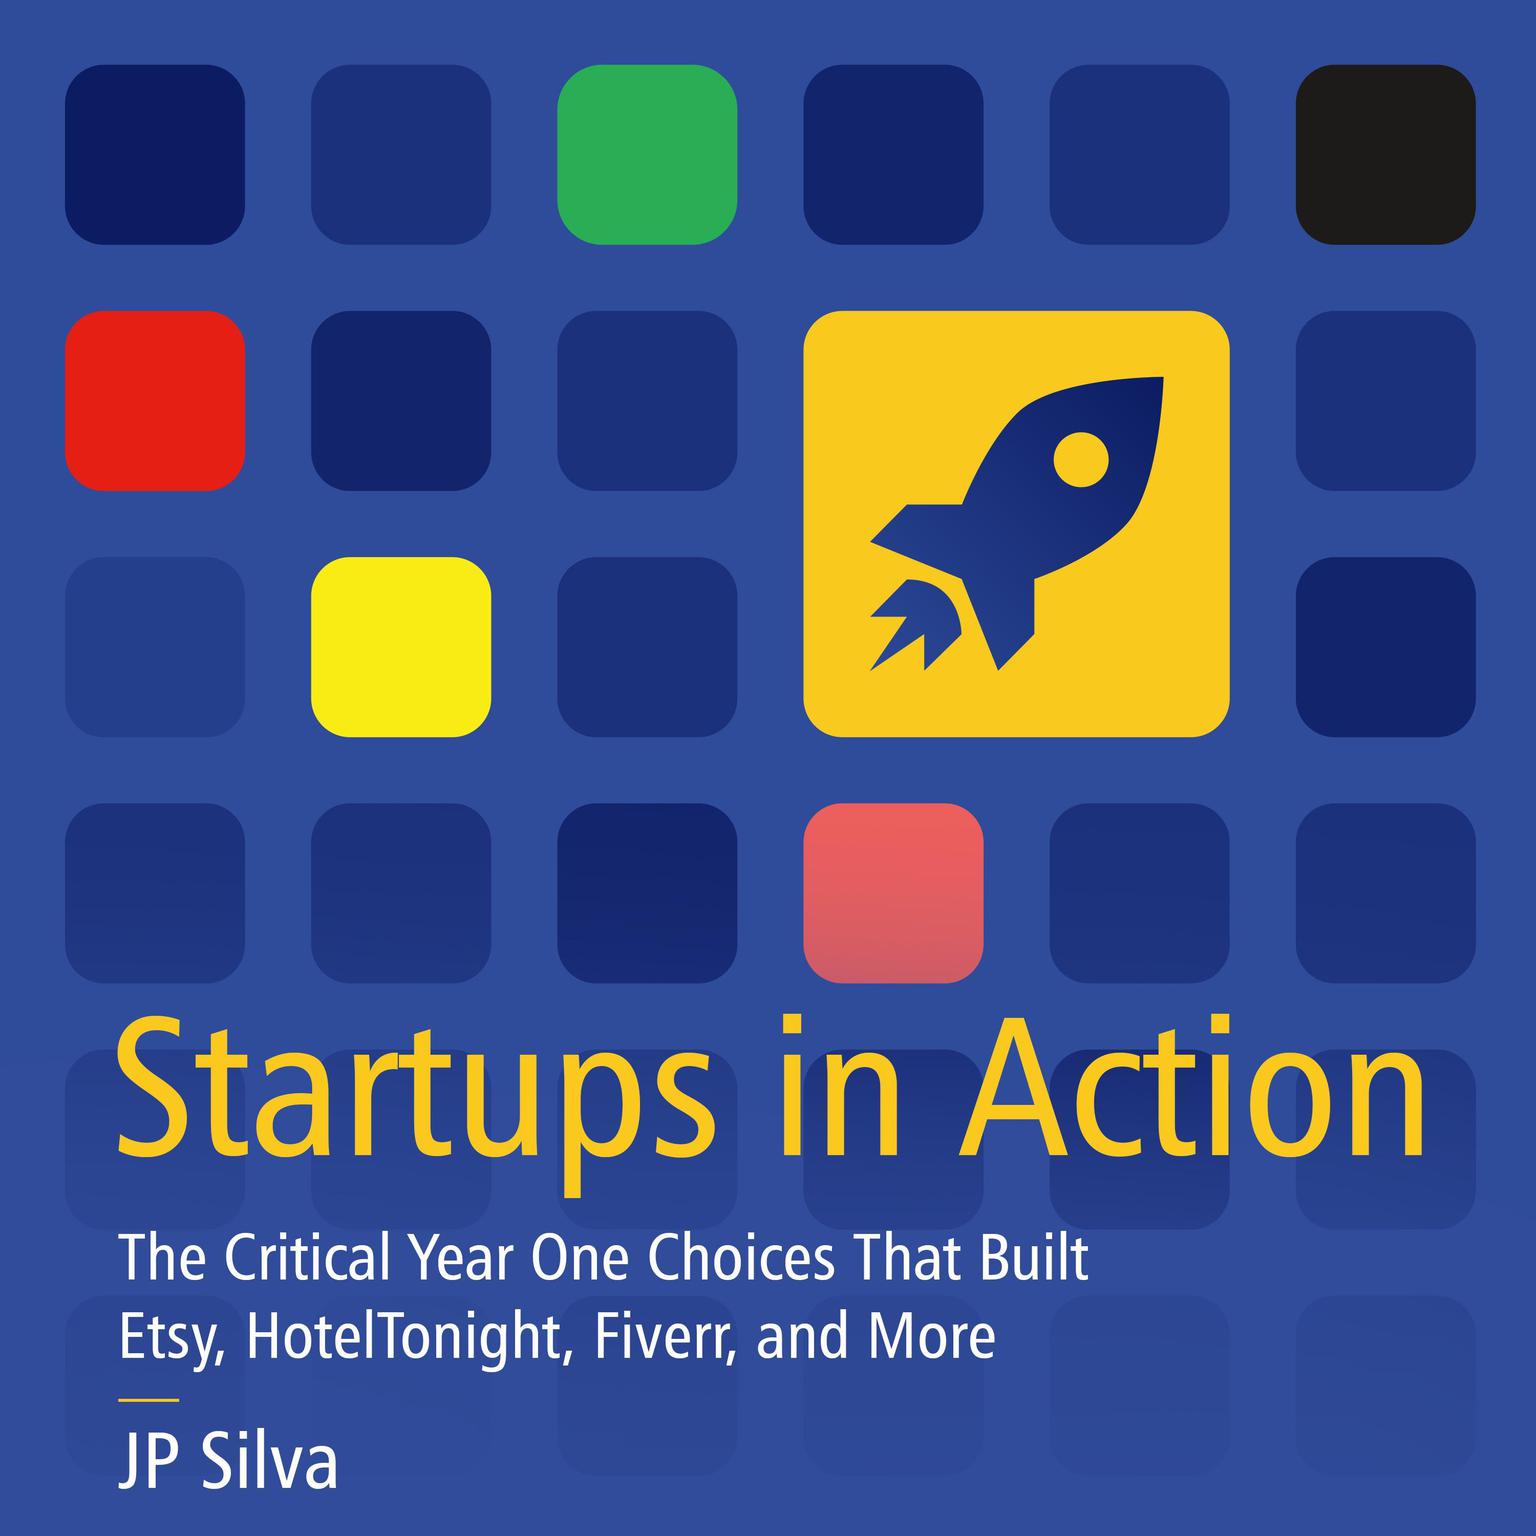 Startups in Action: The Critical Year One Choices That Built Etsy, HotelTonight, Fiverr, and More Audiobook, by JP Silva